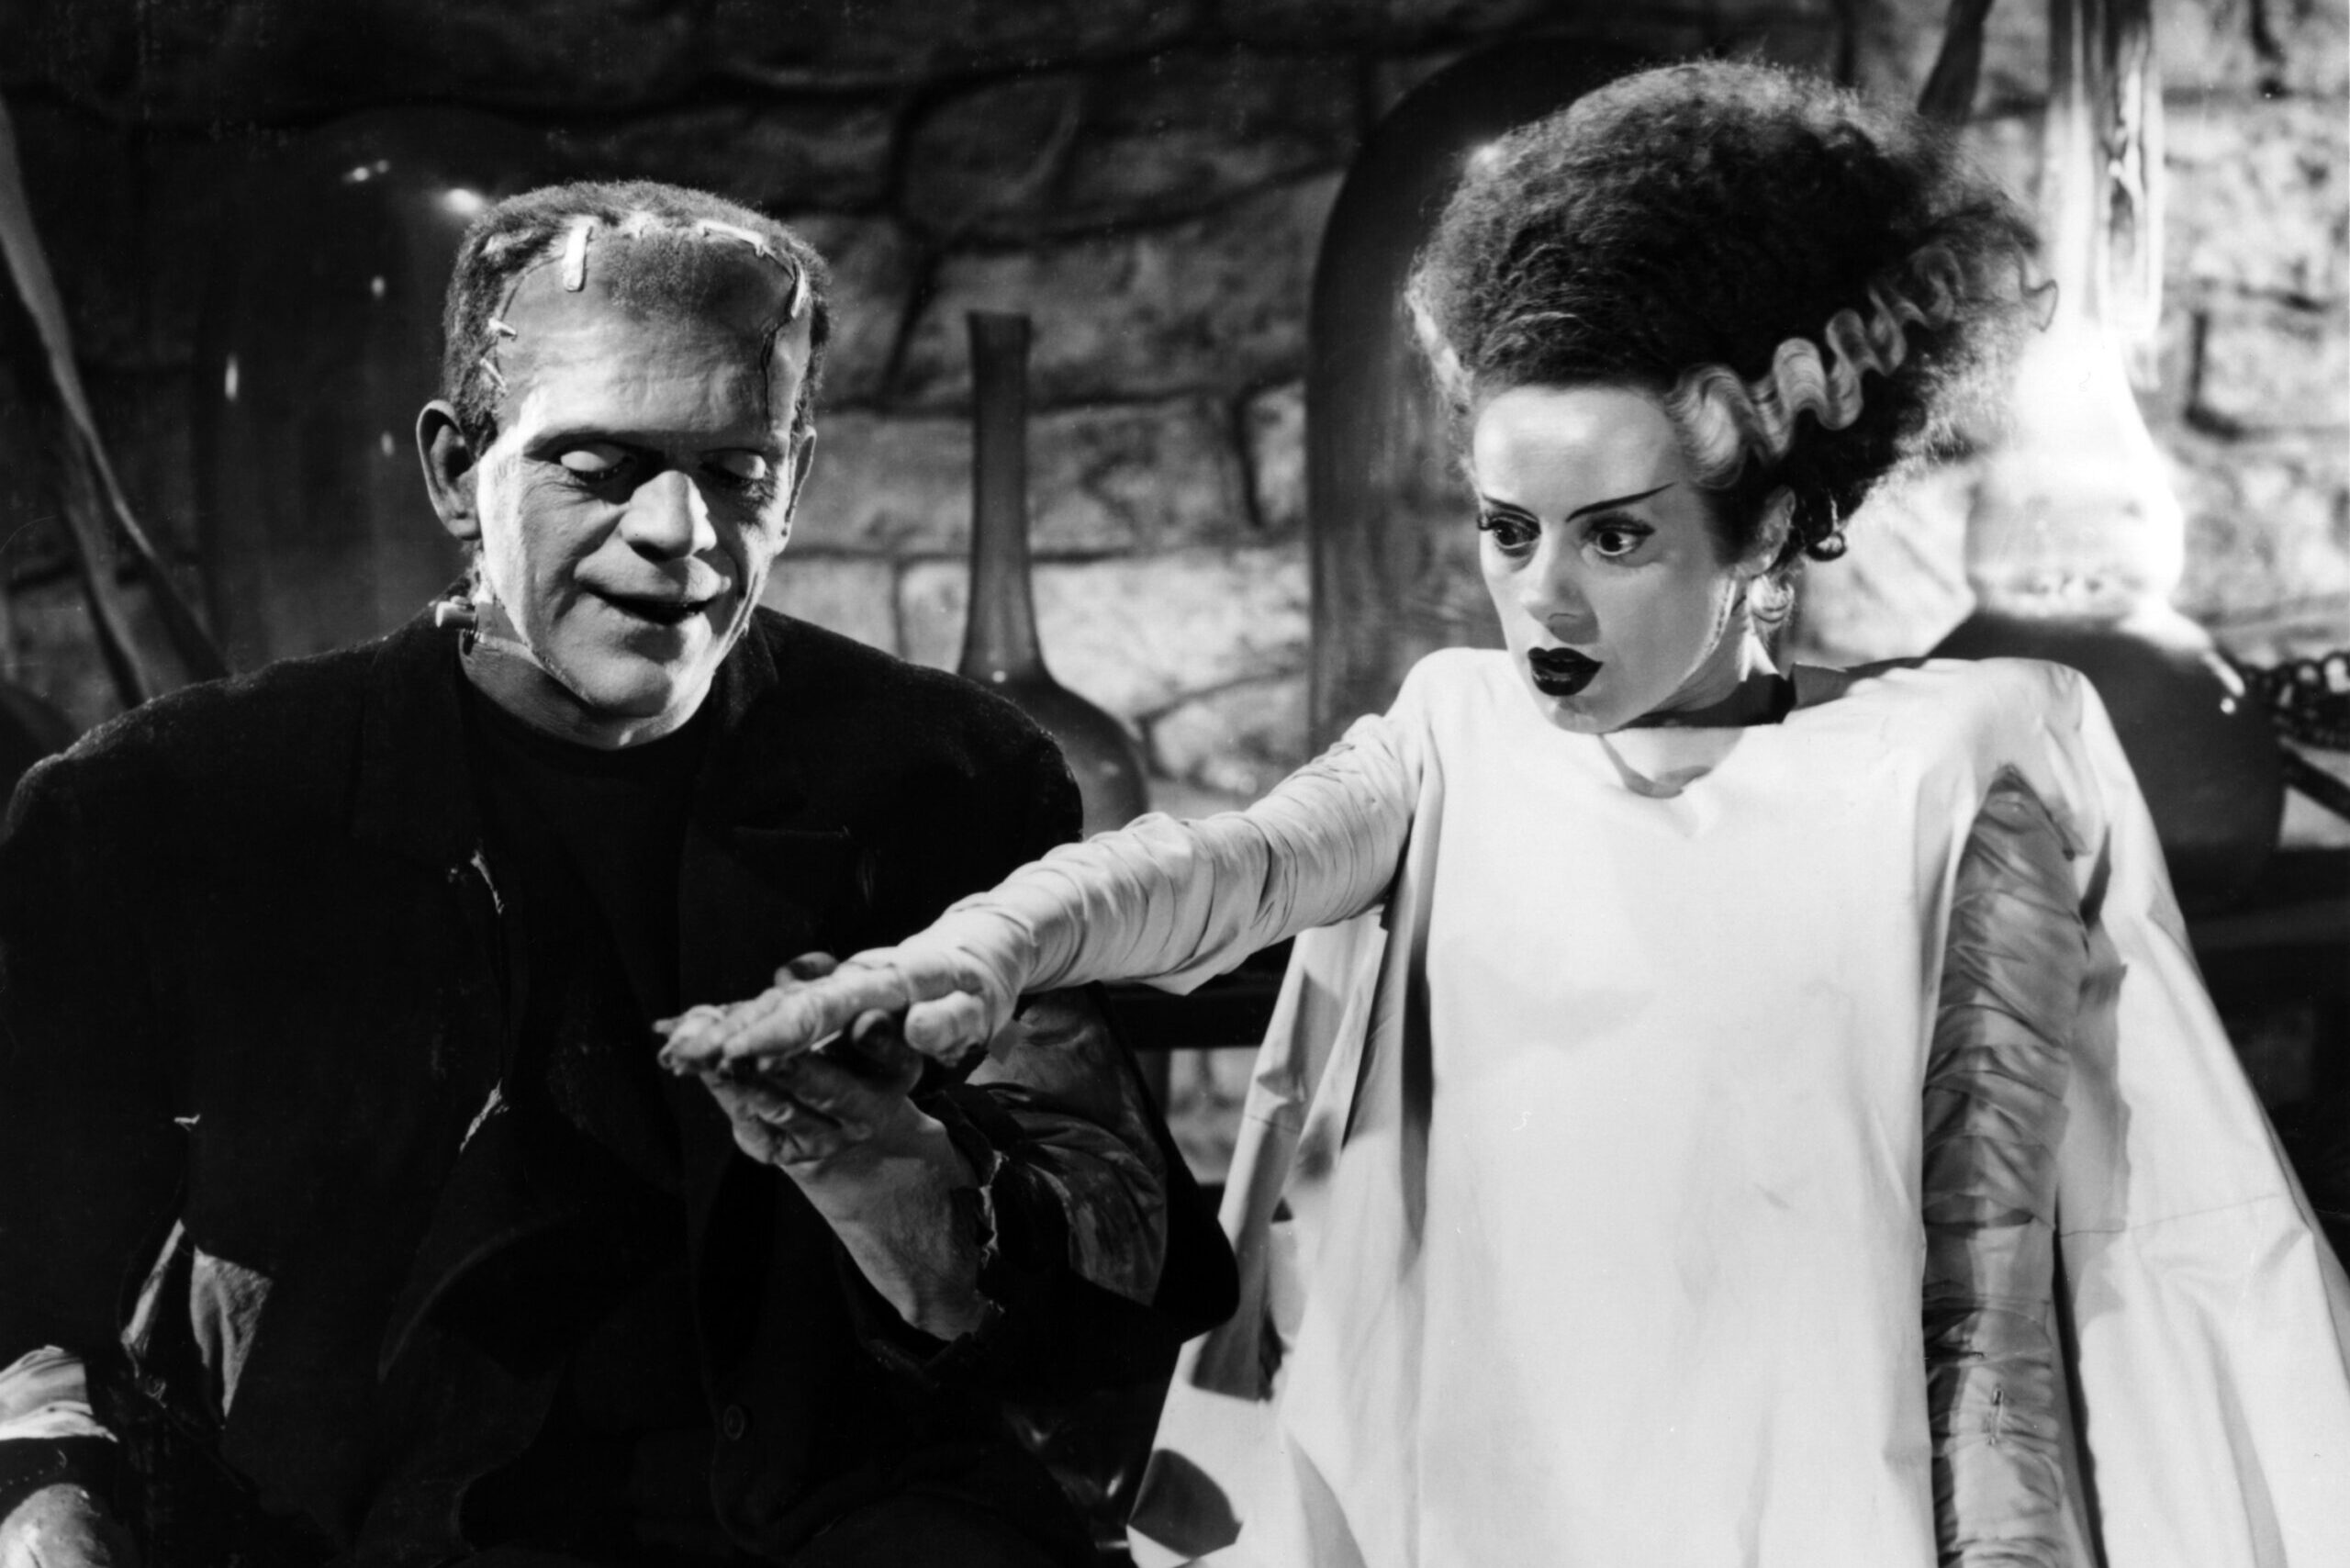 Still from the 1935 film The Bride of Frankenstein of Boris Karloff as Frankenstein's monster and Elsa Lancheste as the Bride pictured from left to right.